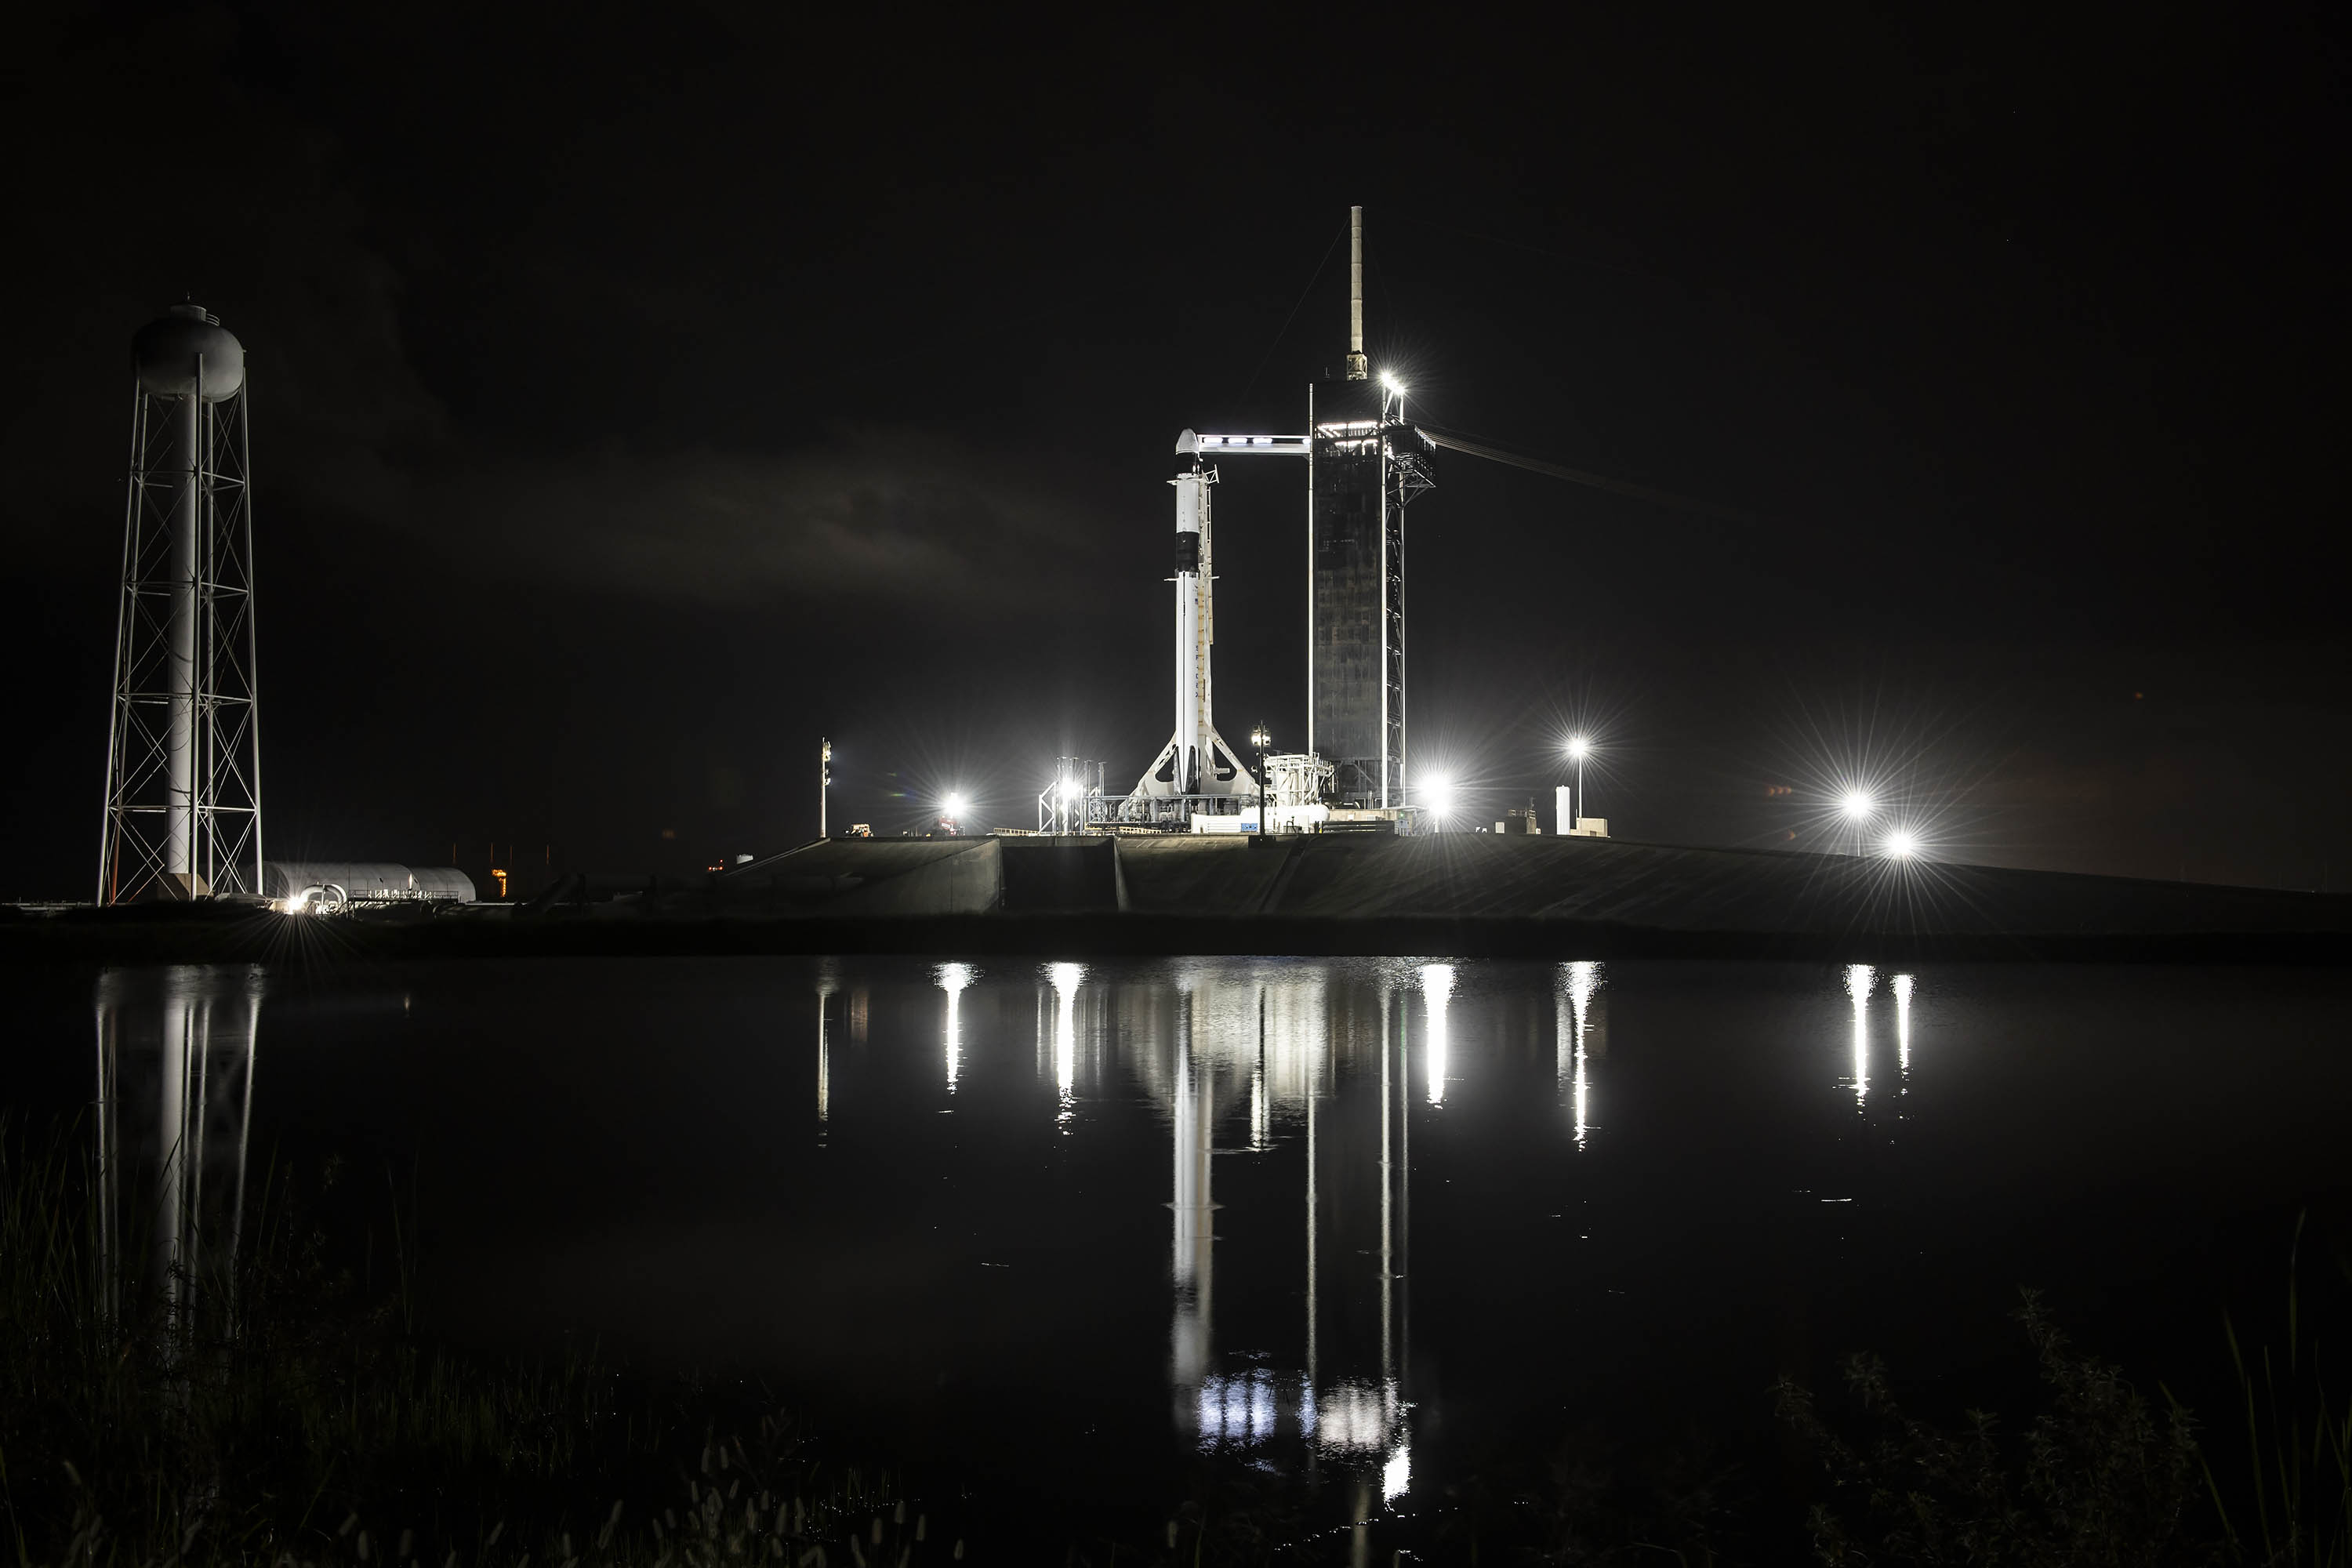 A new SpaceX Falcon 9 rocket and a previously flown Cargo Dragon spacecraft stand atop Pad 39B of NASA's Kennedy Space Center in Florida ahead of a planned Dec. 21, 2021 launch to the International Space Station.